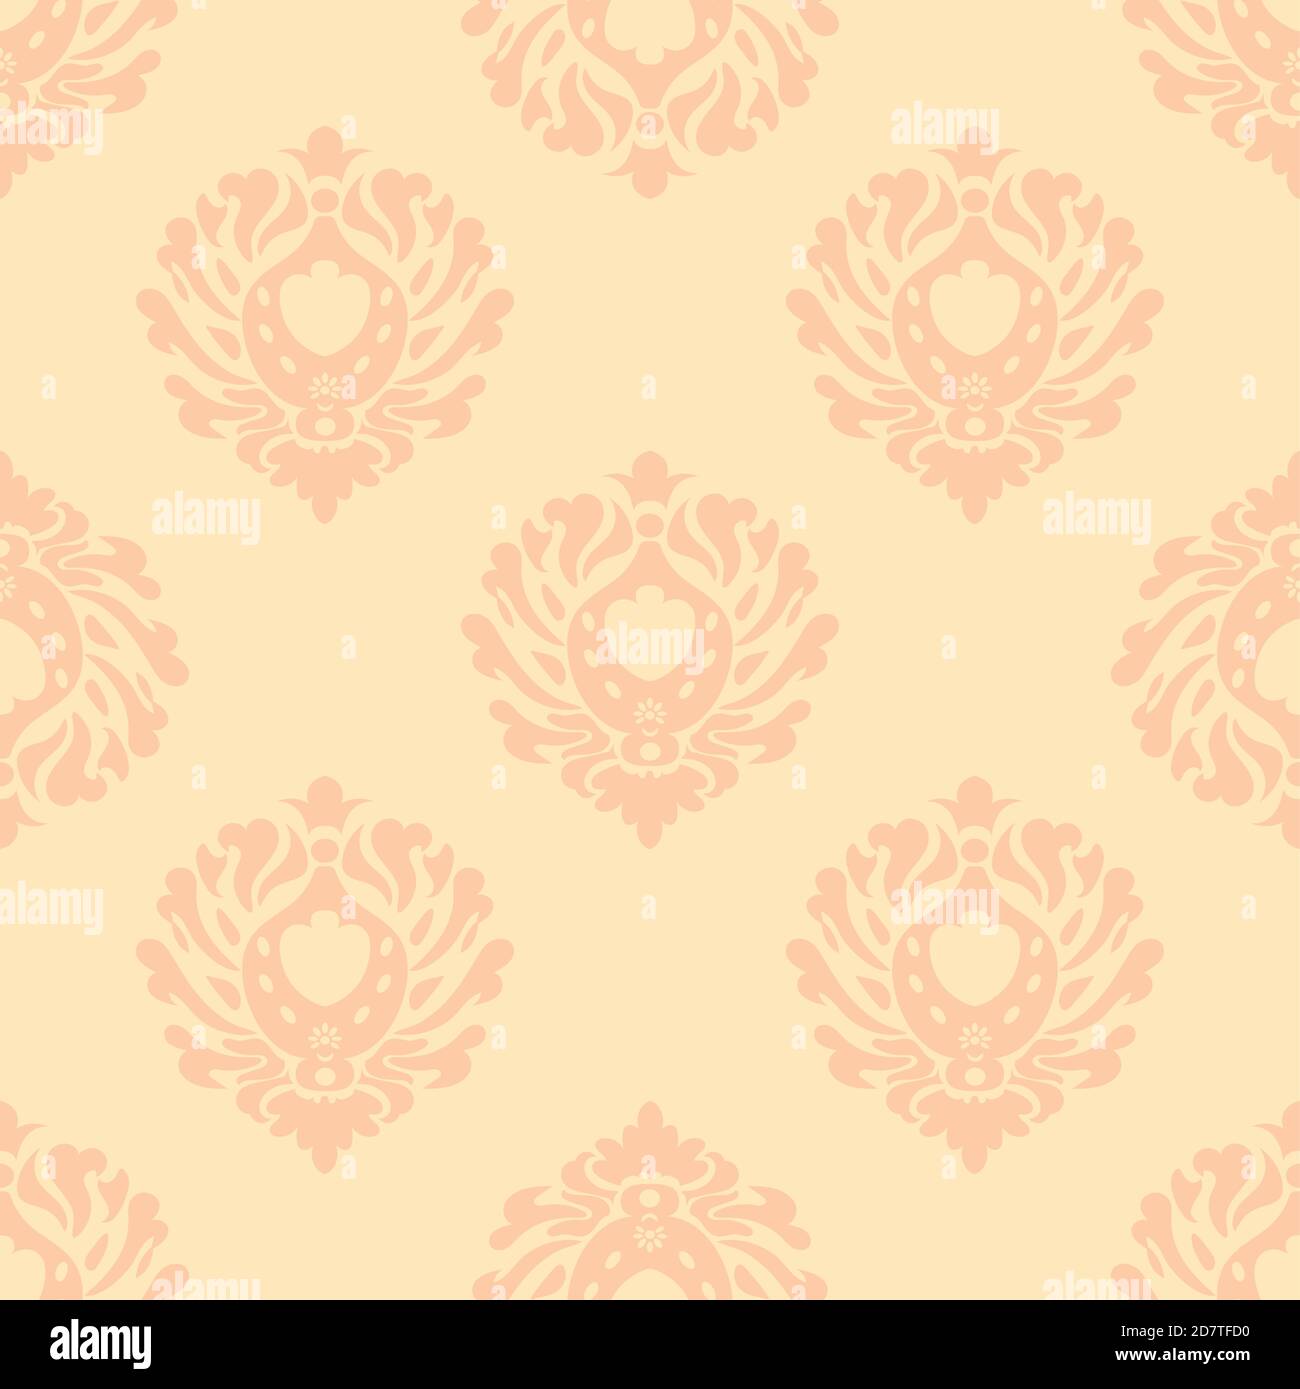 Vector illustration. Damask seamless pattern of flowers. Pastel brown pattern on a beige background. Baroque classicism. Stock Vector